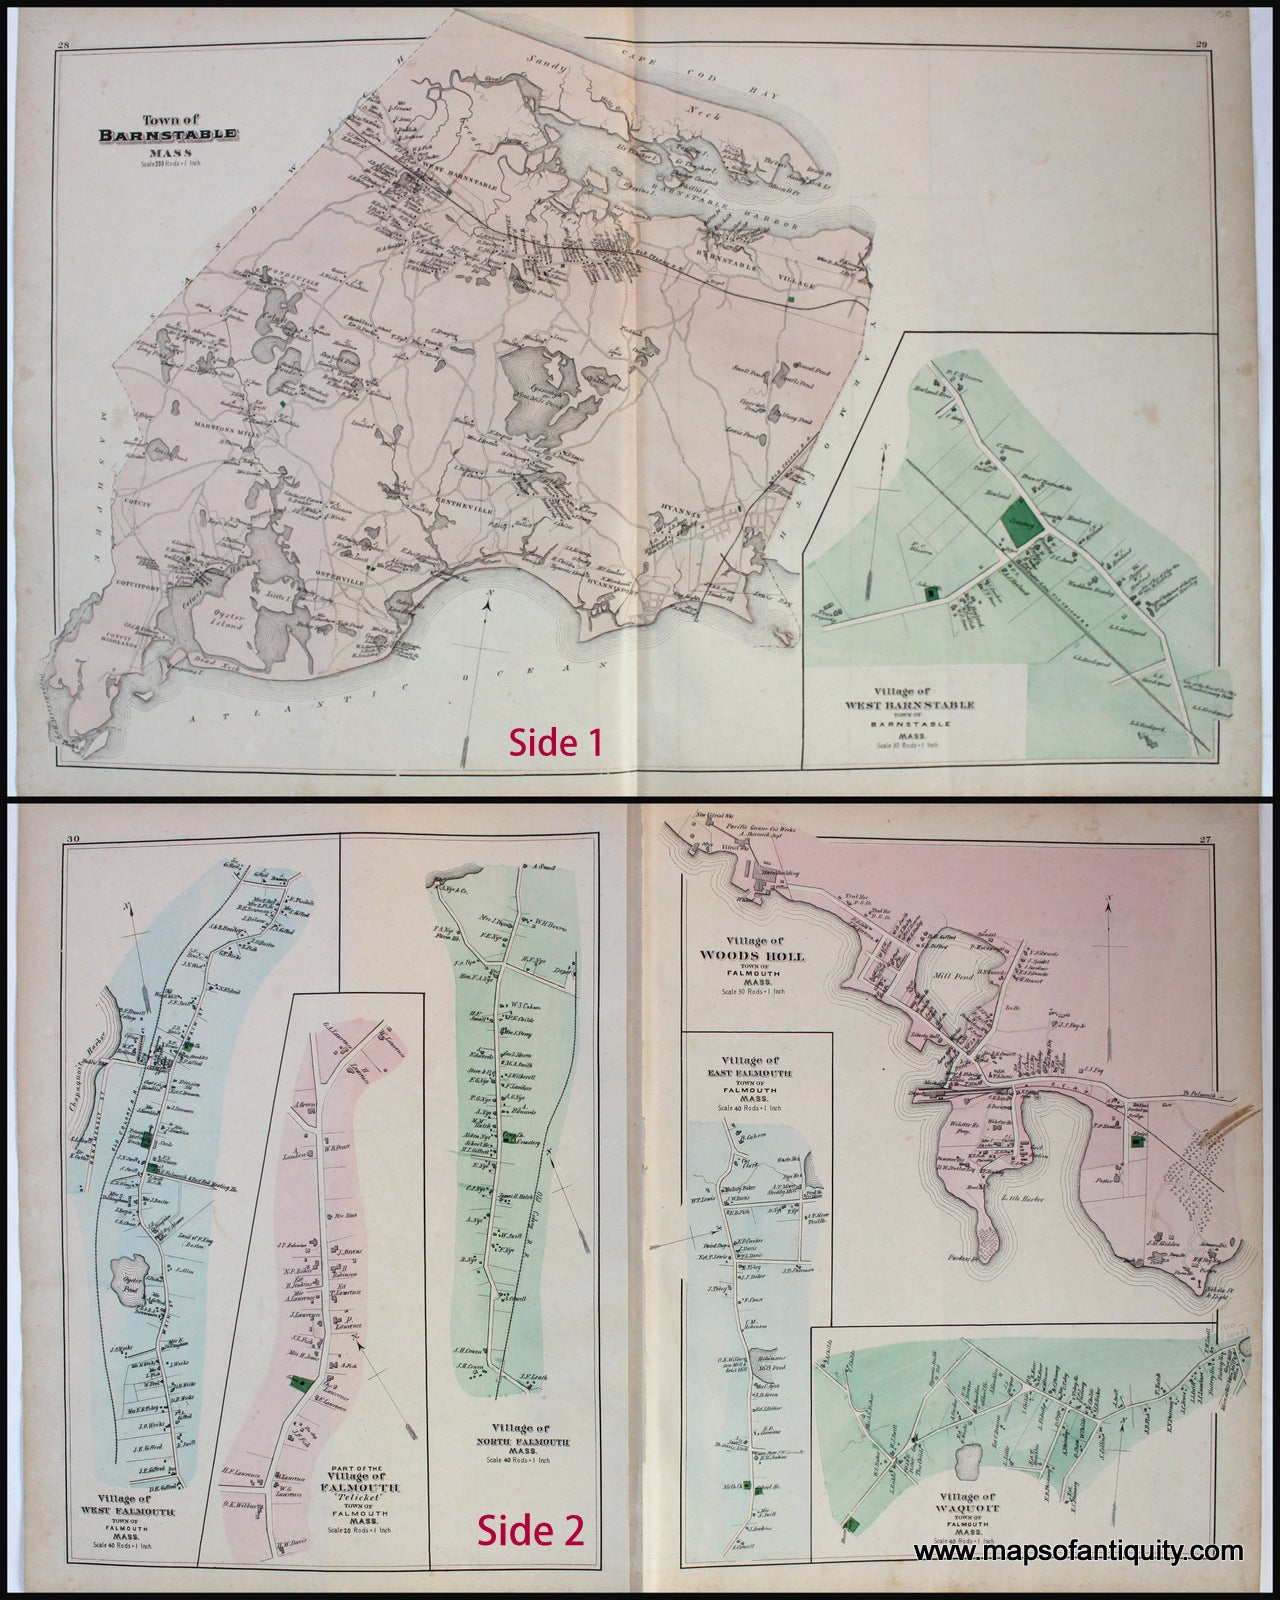 Antique-Map-Town-of-Barnstable-Village-of-West-Barnstable-pp.-28-29.